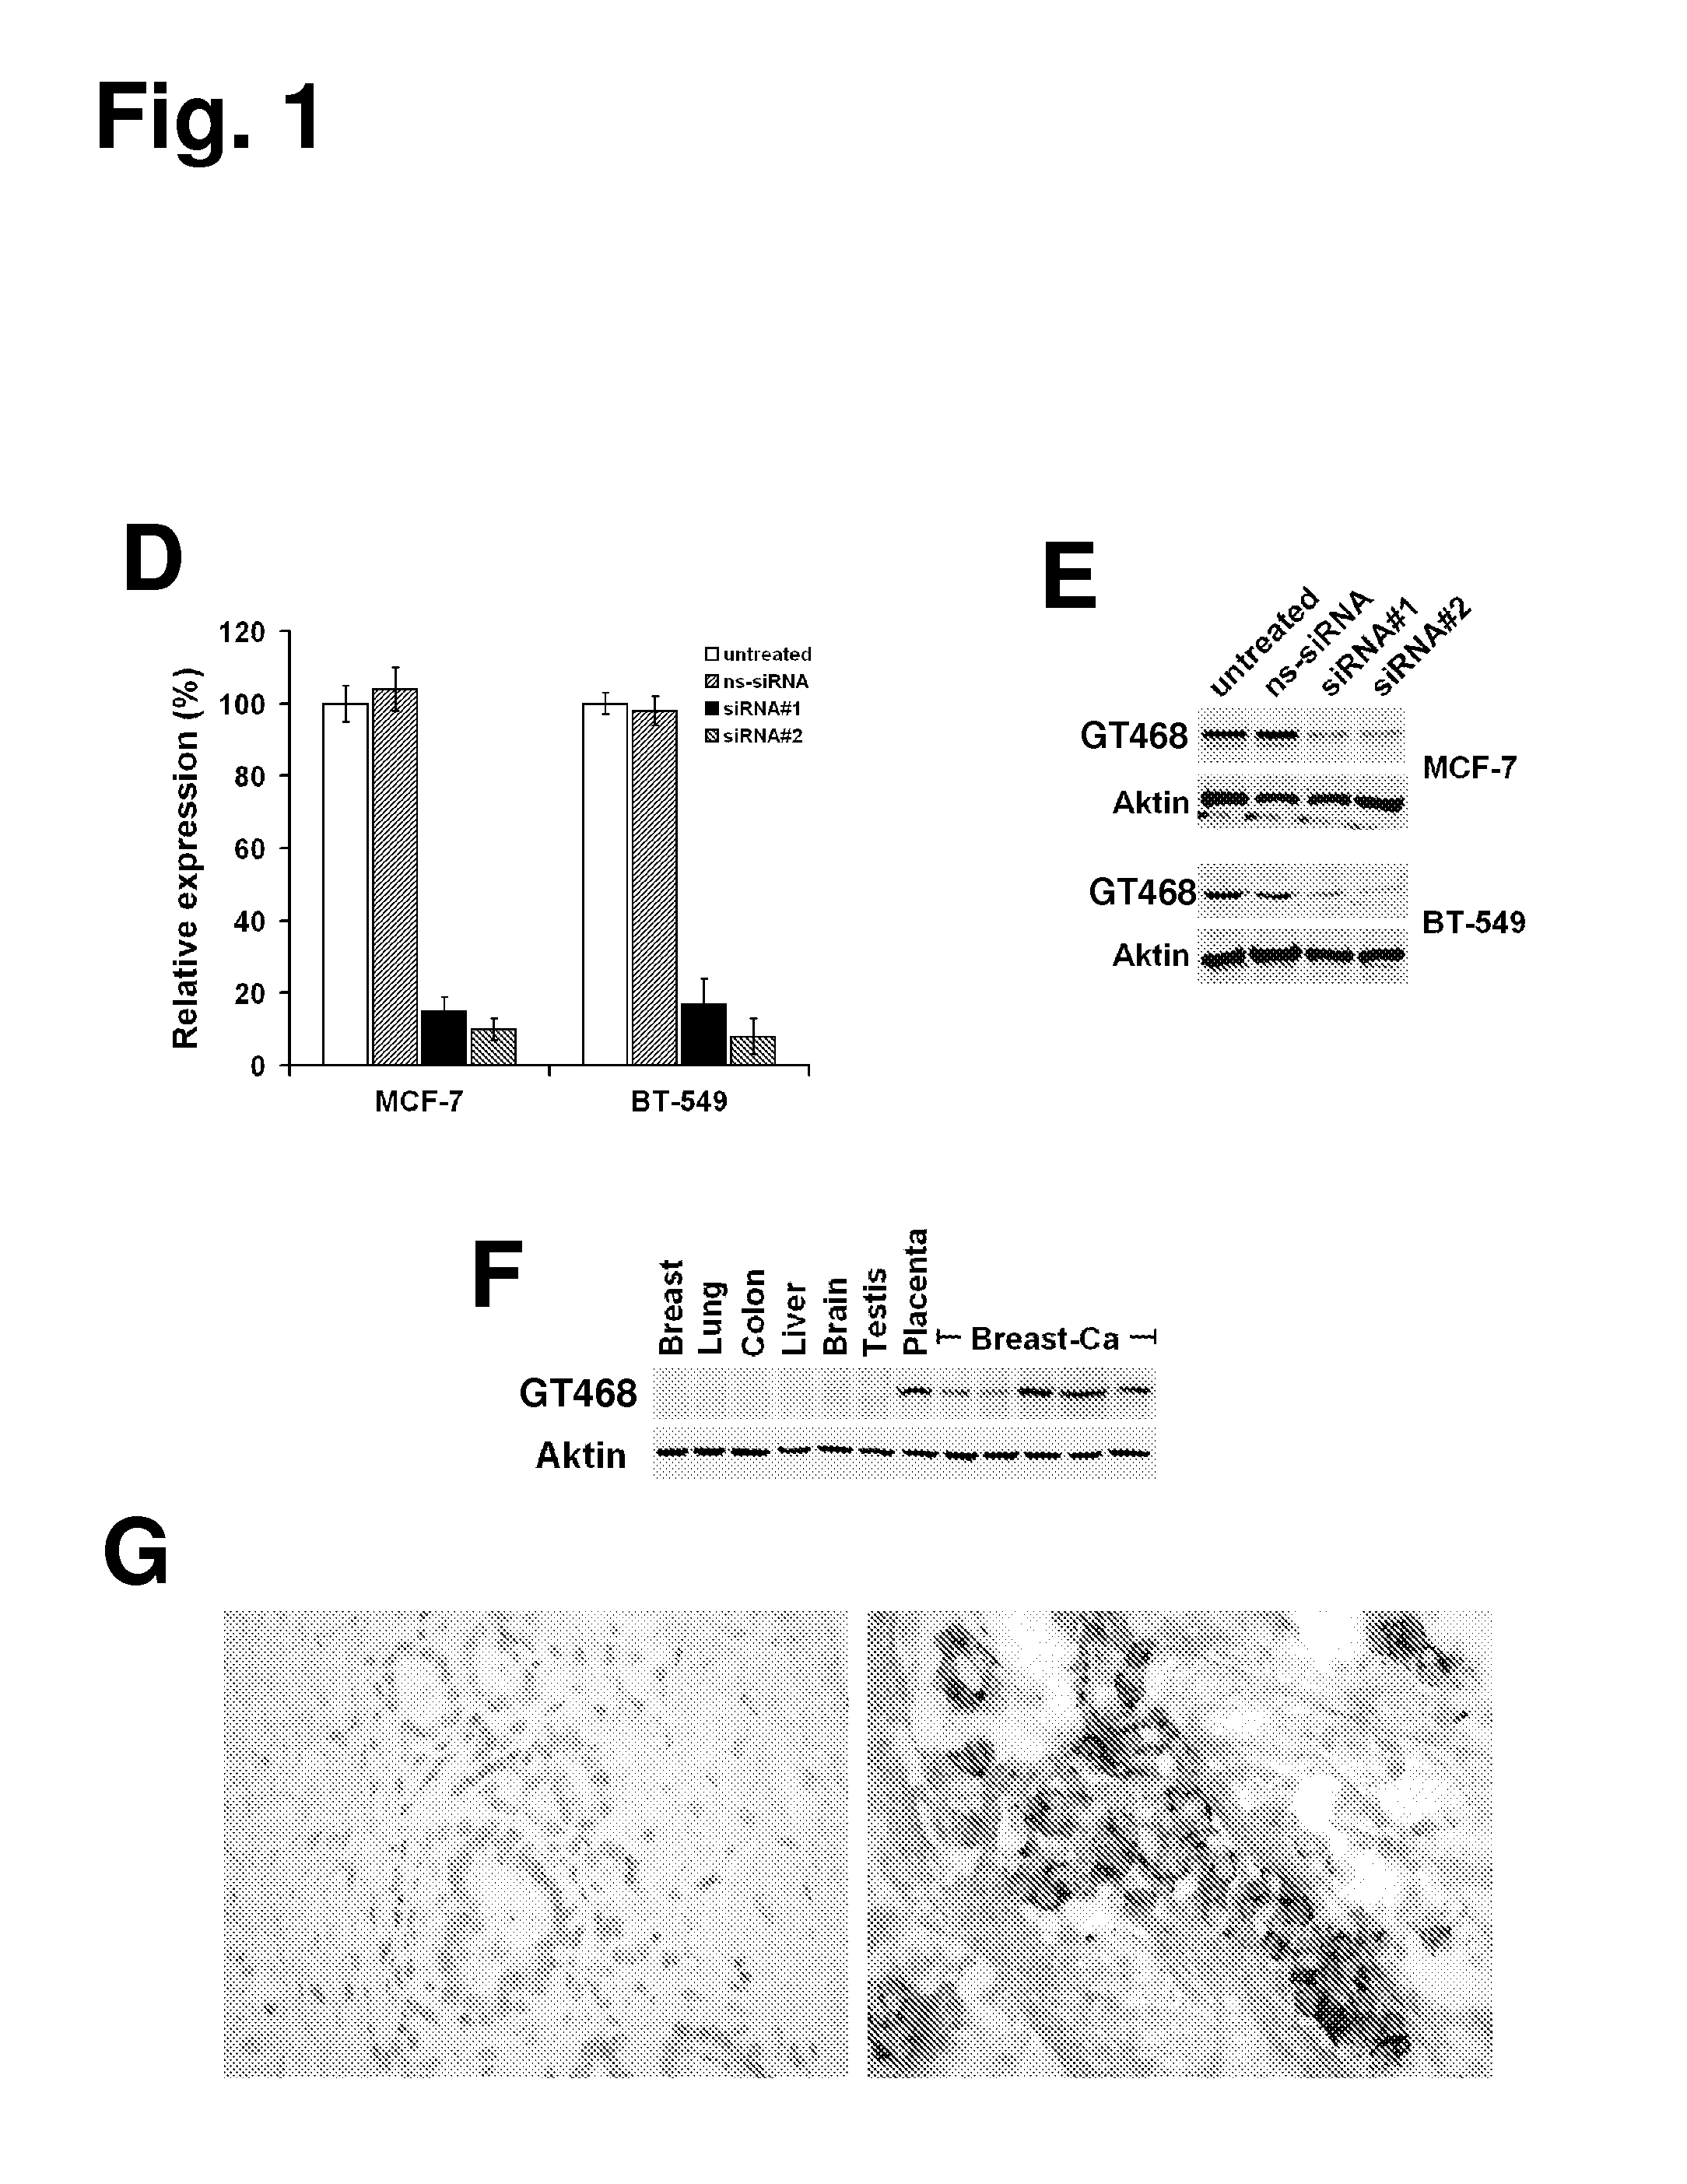 Monoclonal antibodies for treatment of cancer